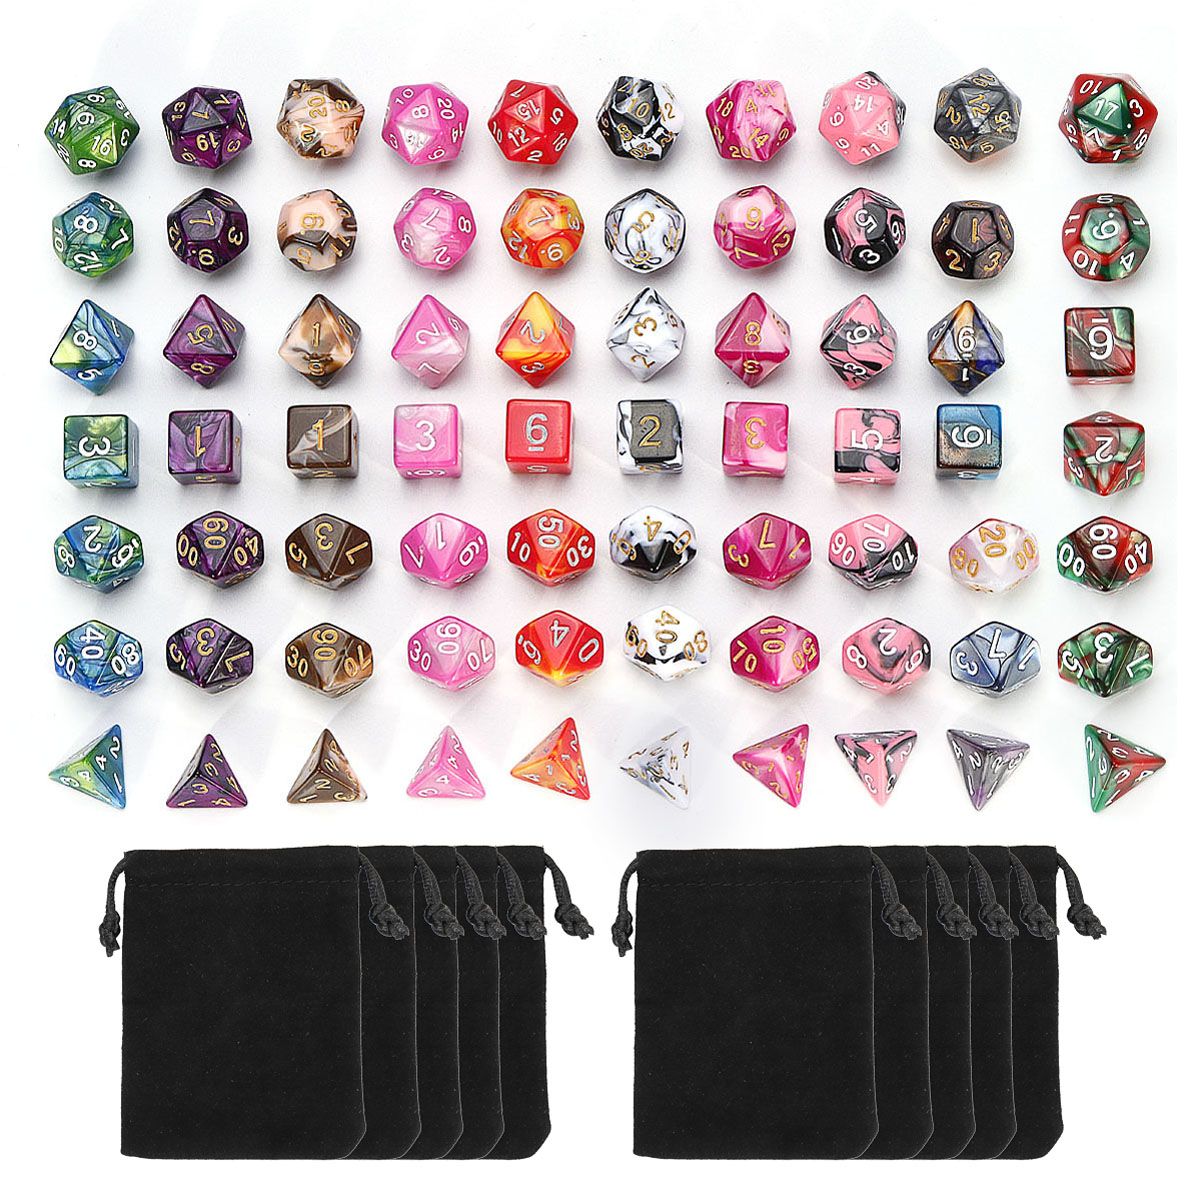 7Pcs-Polyhedral-Dices-Double-Color-For-Role-Playing-Game-Dice-Set-With-Storage-Bag-1422309